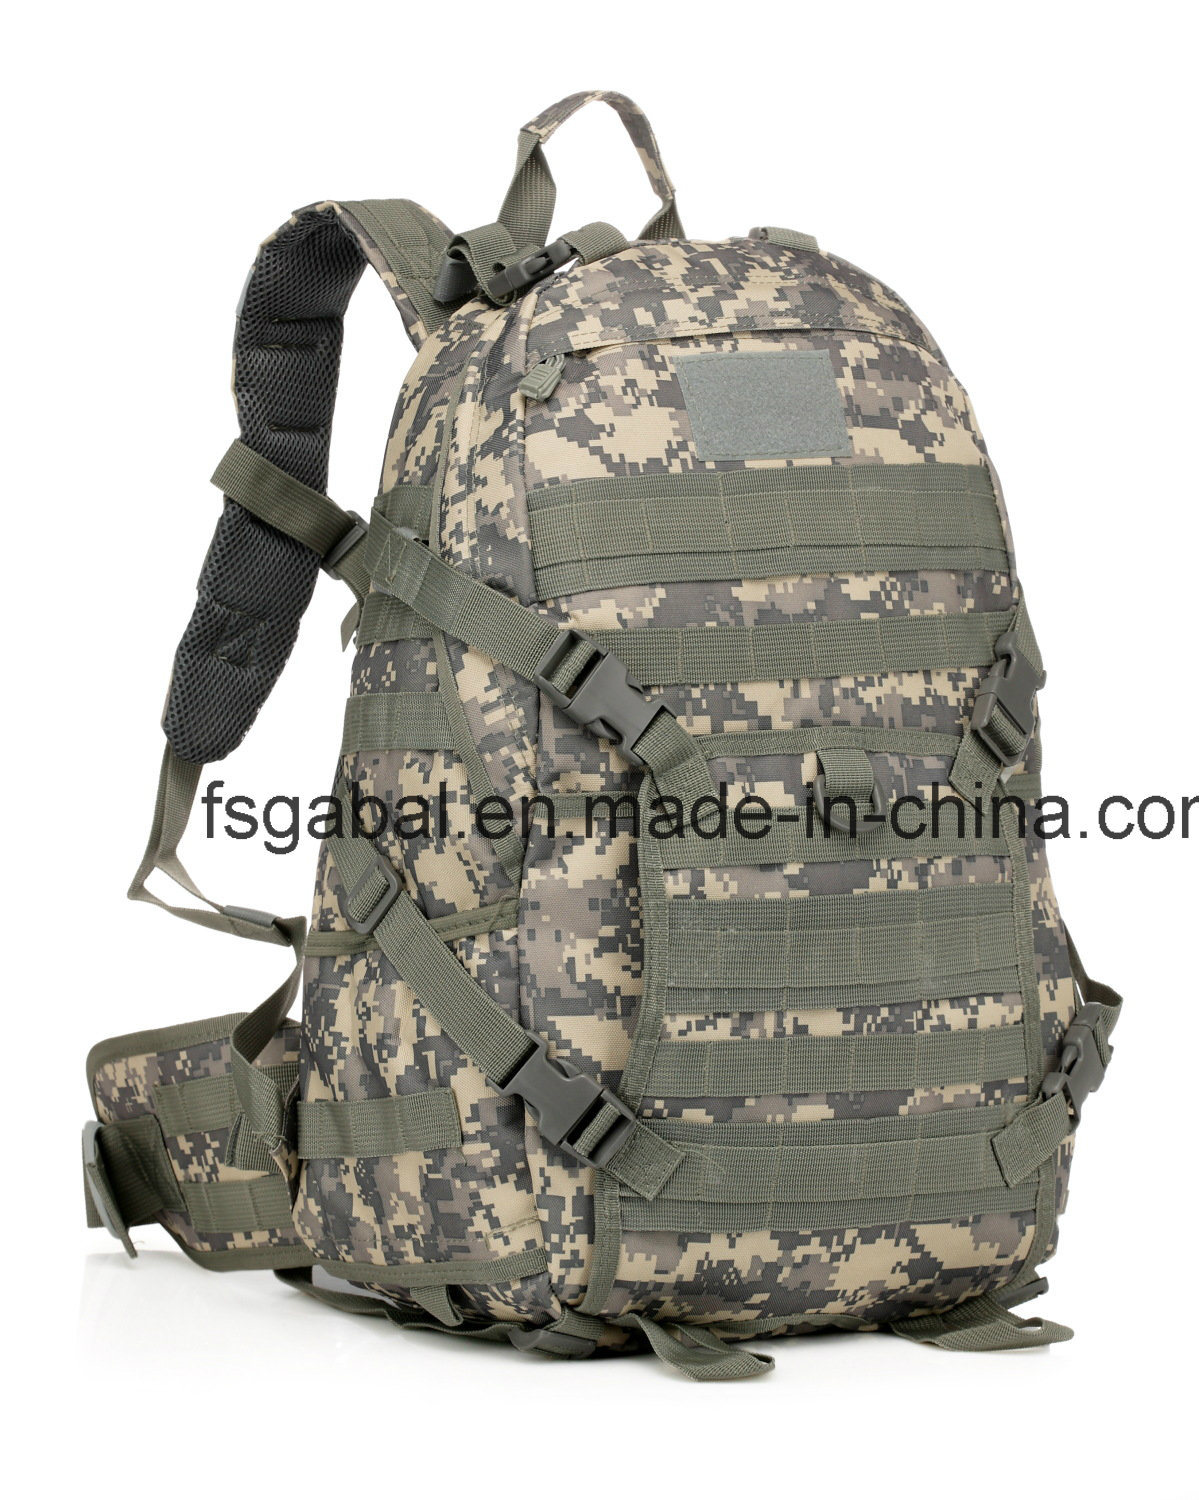 Tad Style Camouflage Military Tactical Assault Sports Travel Backpack